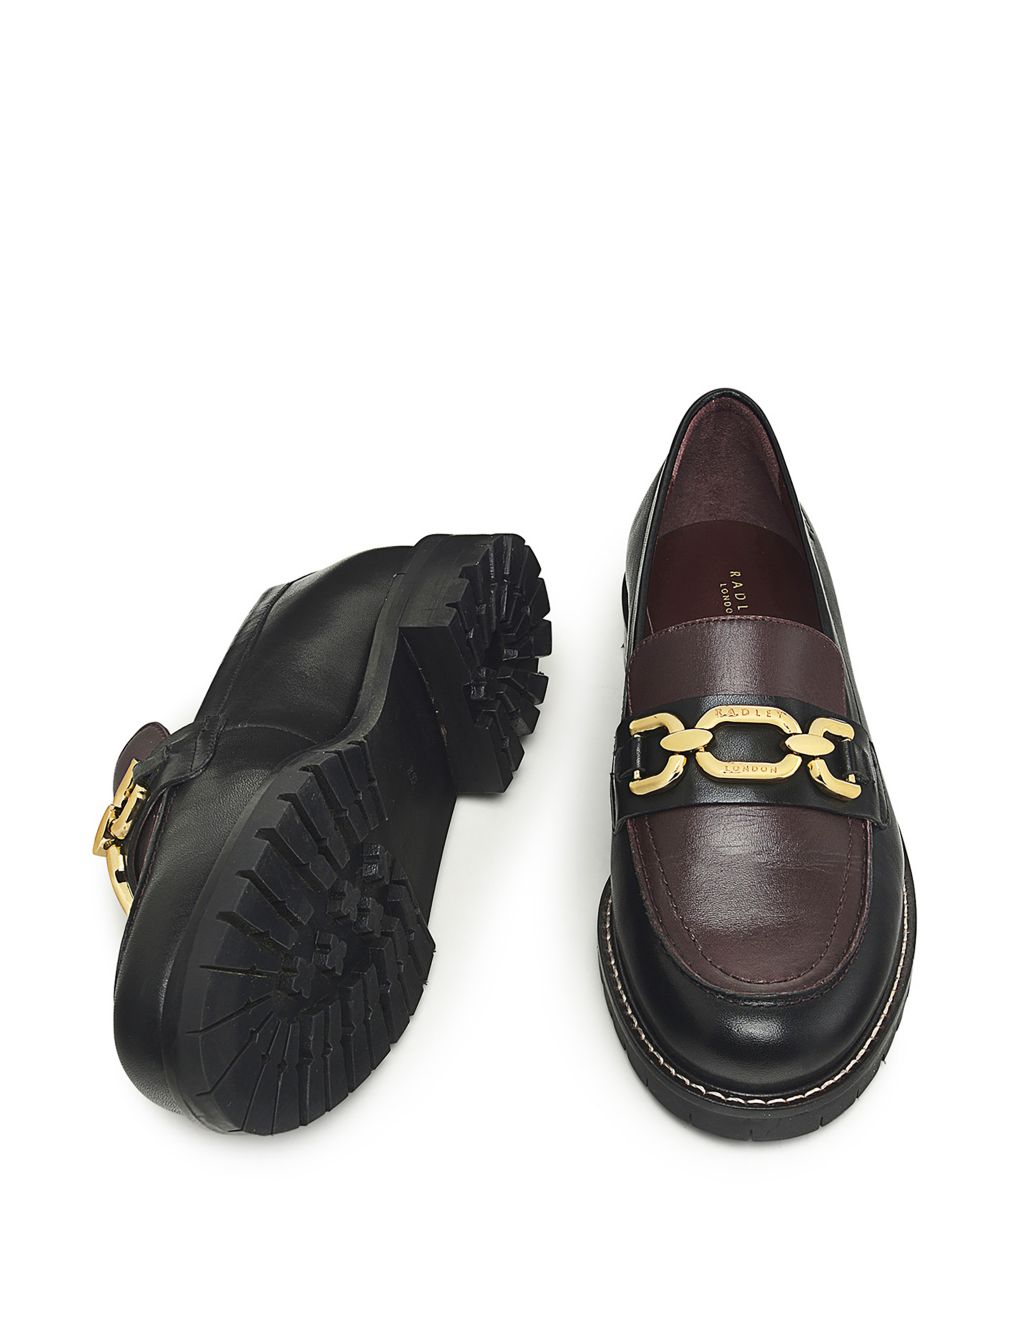 Leather Chunky Chain Detail Loafers image 4